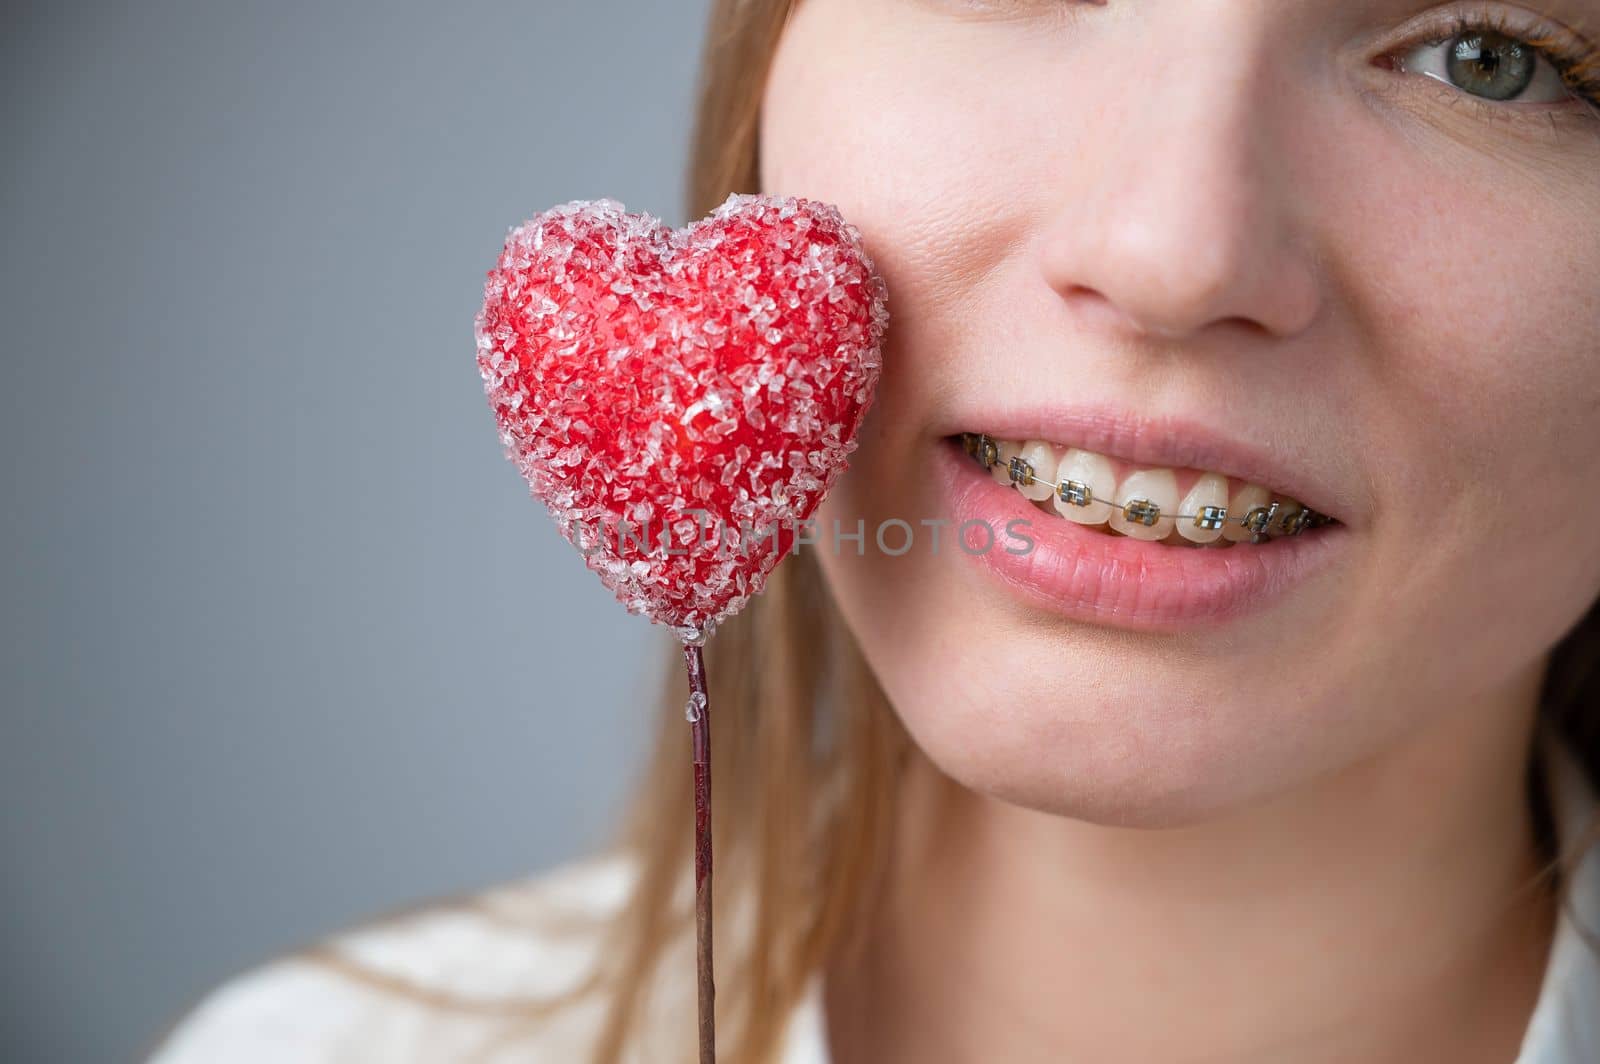 Cute woman with braces on her teeth holds a candy in the form of a heart on white background by mrwed54